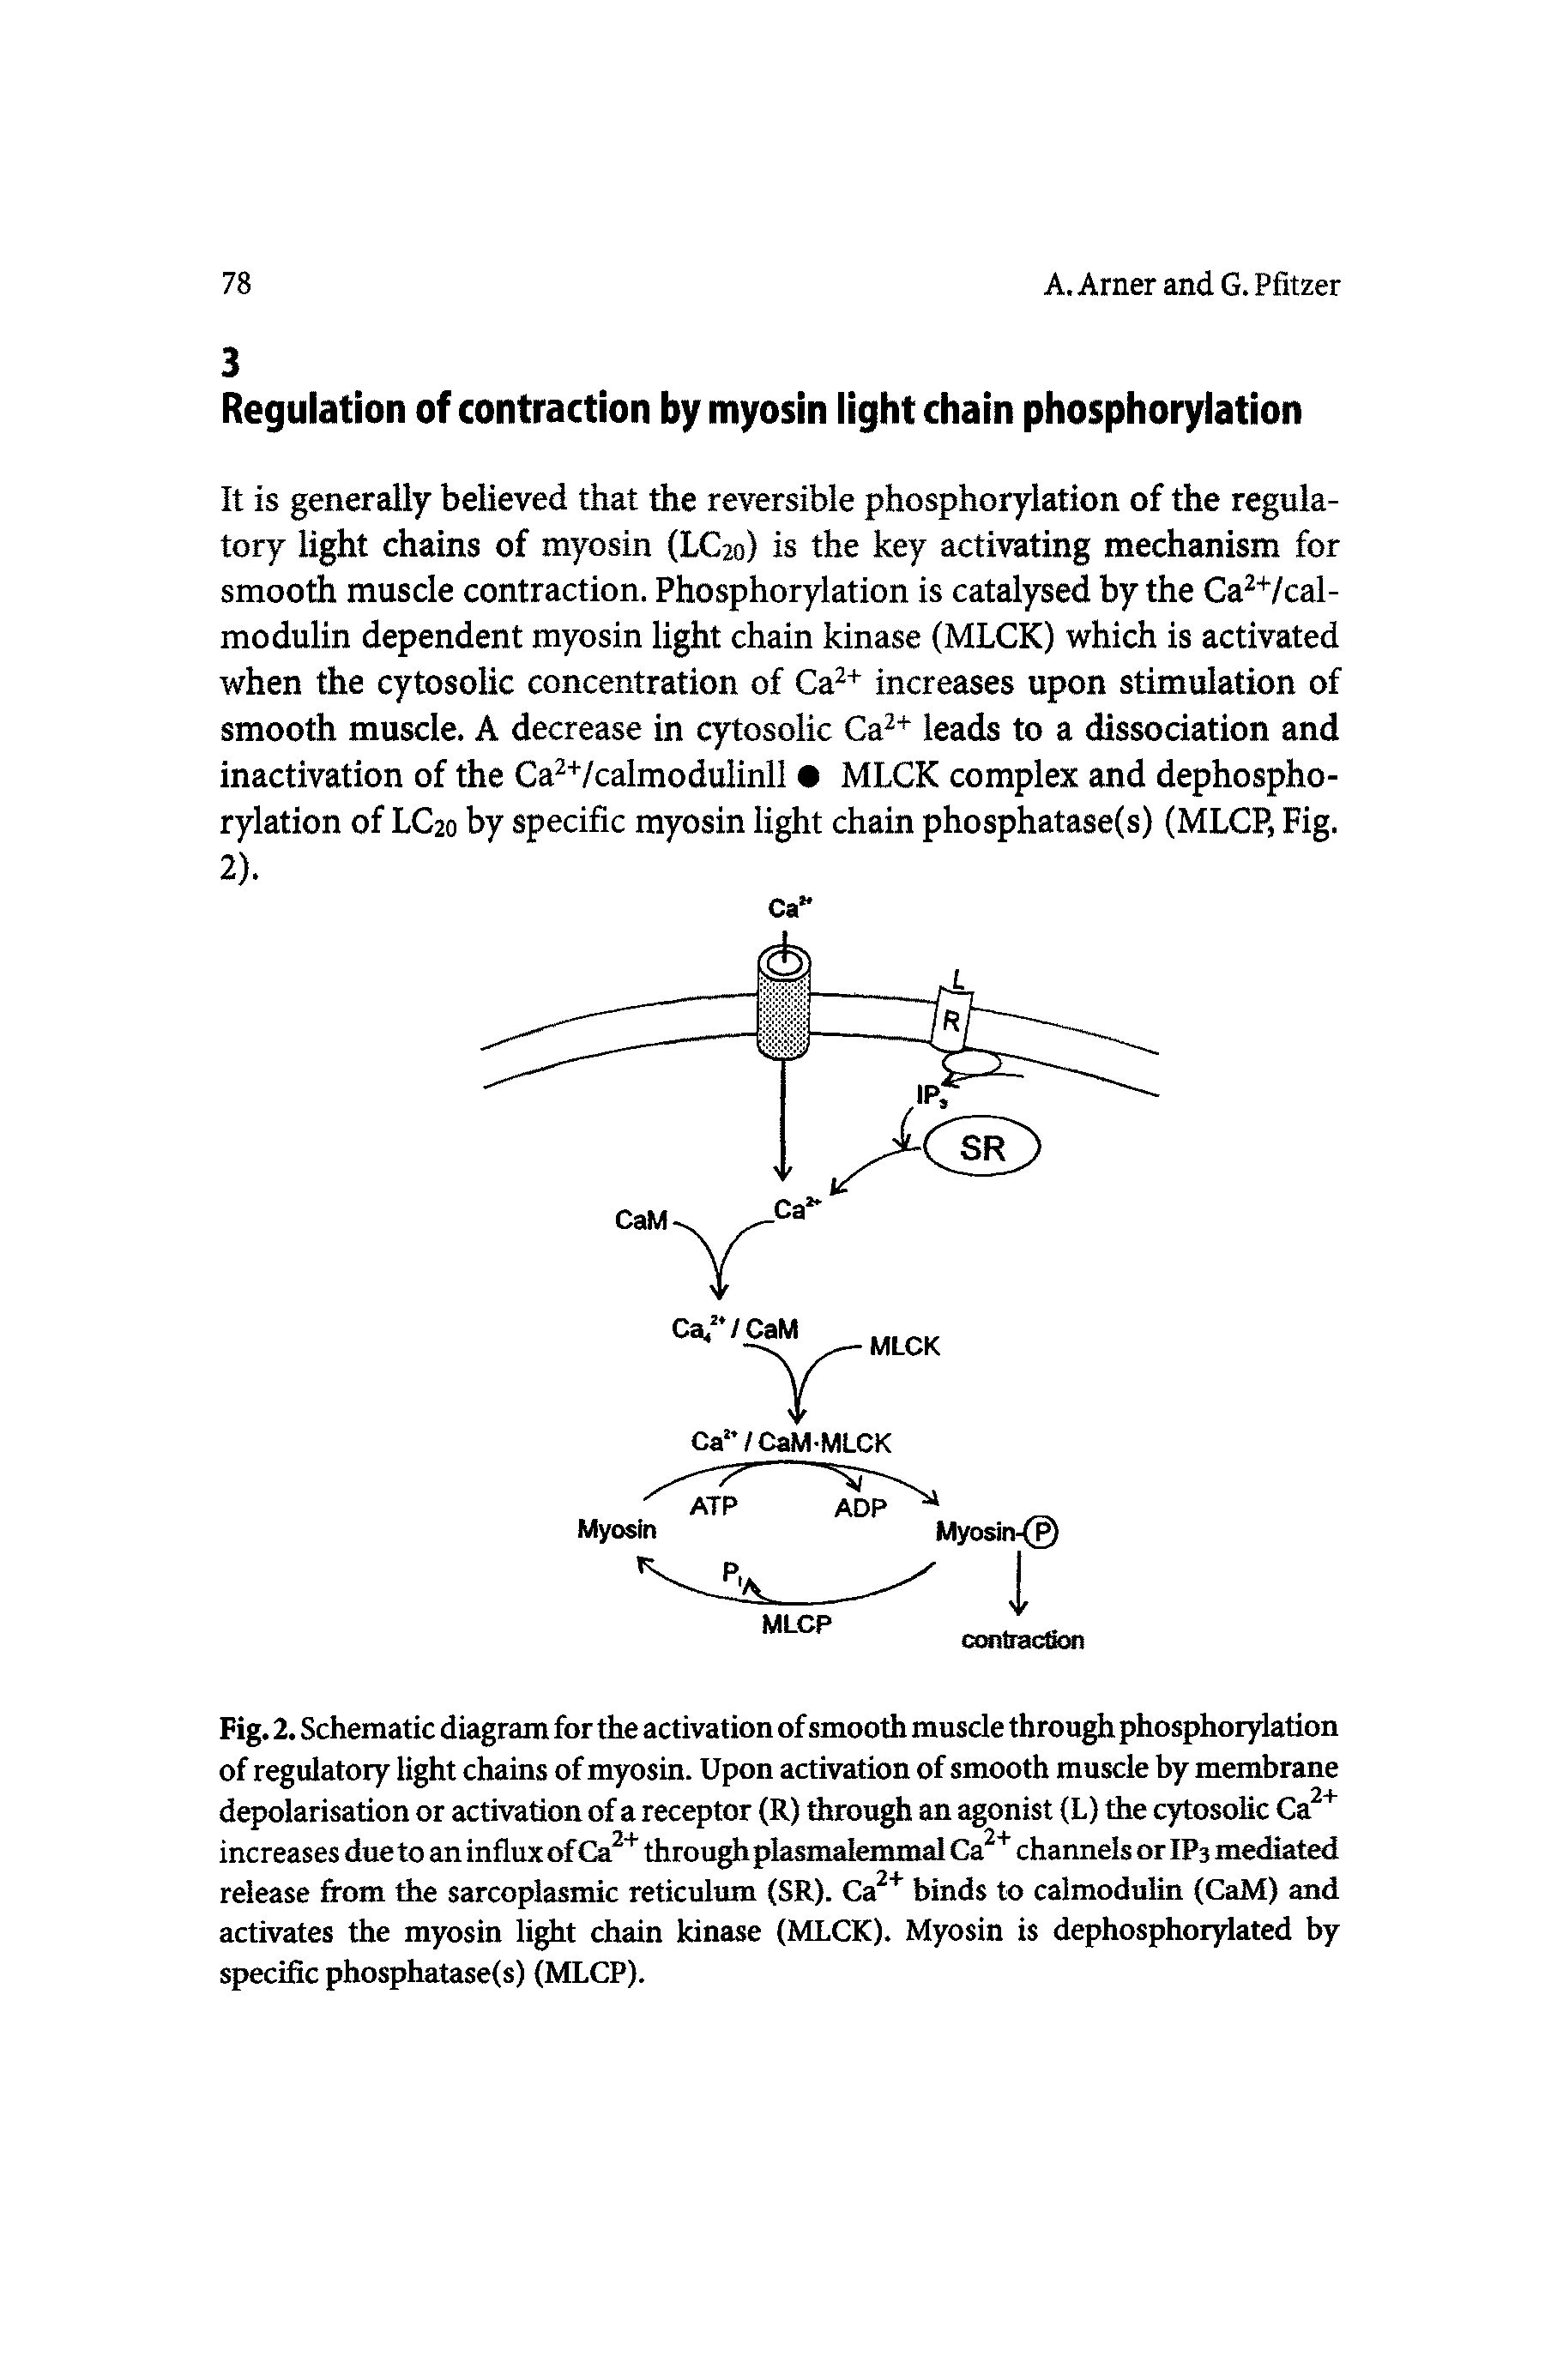 Fig. 2. Schematic diagram for the activation of smooth muscle through phosphorylation of regulatory light chains of myosin. Upon activation of smooth muscle by membrane depolarisation or activation of a receptor (R) through an agonist (L) the cytosolic Ca " increases due to an influx of Ca through plasmalemmal Ca channels or IP3 mediated release from the sarcoplasmic reticulum (SR). Ca binds to calmodulin (CaM) and activates the myosin light chain kinase (MLCK). Myosin is dephosphorylated by specific phosphatase(s) (MLCP).